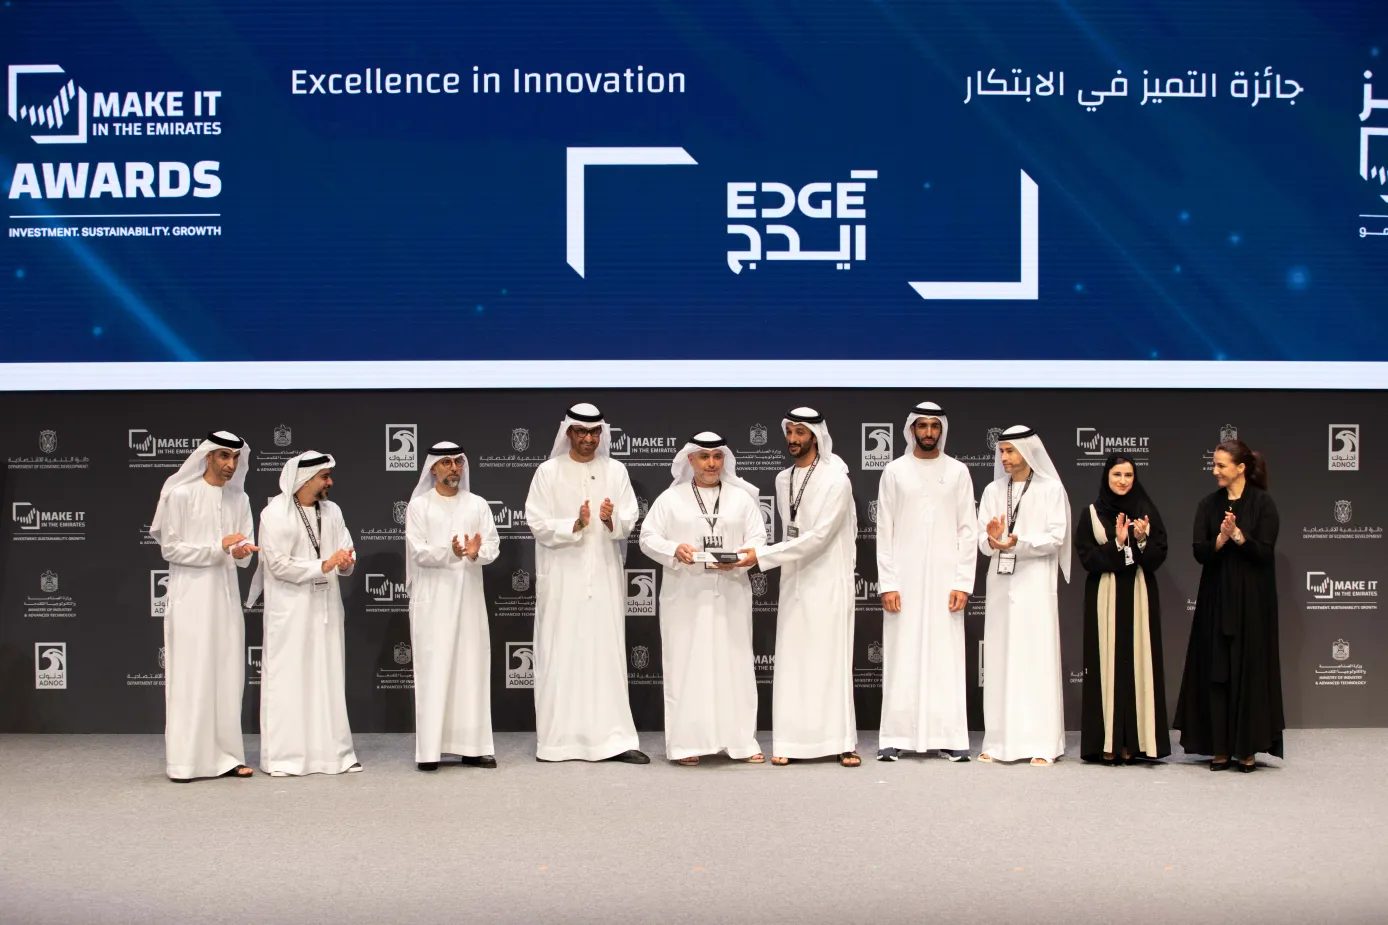 EDGE Awarded Make it in the Emirates ‘Excellence in Innovation’ Award for Implementation of Advanced Technologies to Drive Growth &amp; Competitiveness